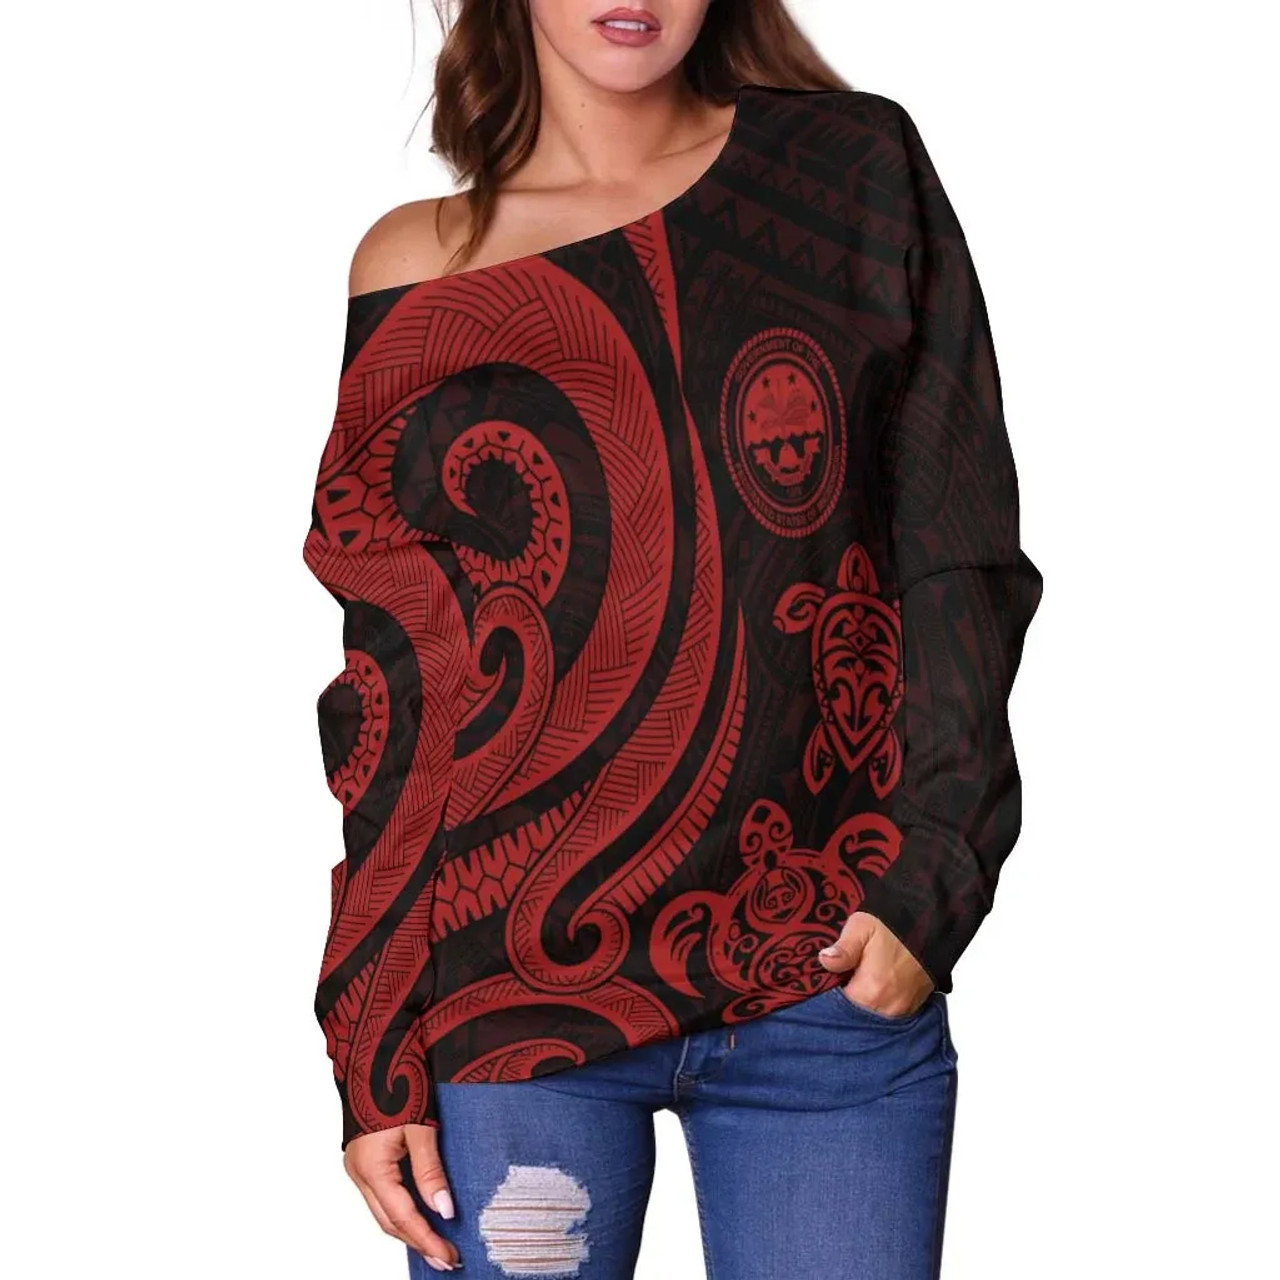 Federated States of Micronesia Women Off Shoulder Sweater - Red Tentacle Turtle 3